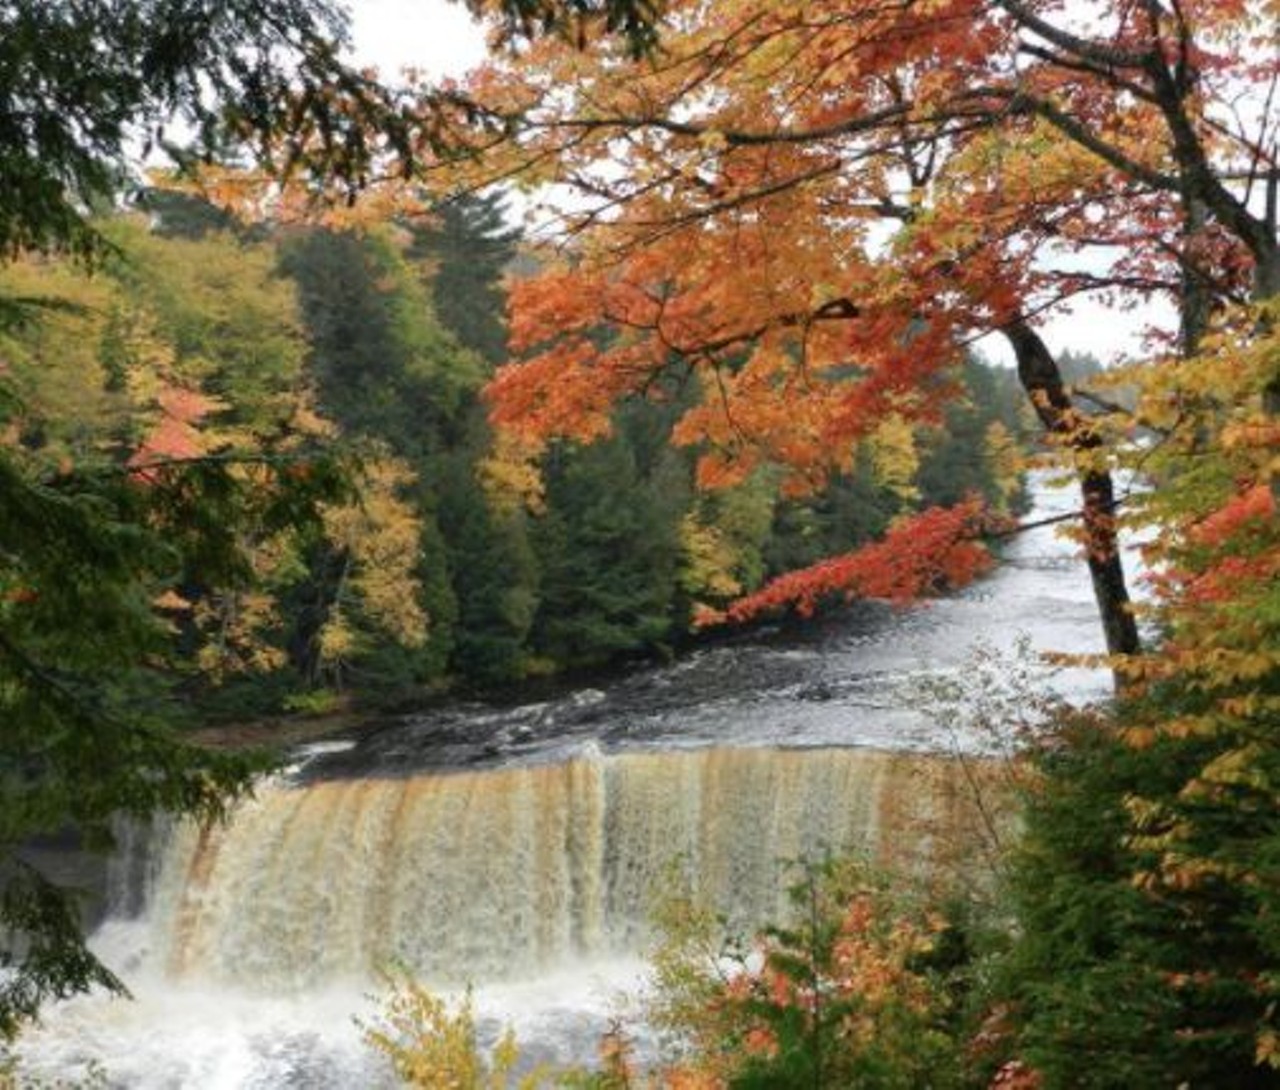 Tahquamenon Falls
Driving distance from Detroit: 5 hours and 12 minutes
Now, this isn&#146;t necessarily a town itself but it&#146;s near one. These falls are in Michigan&#146;s Upper peninsula, and they are breathtaking, just look at that picture. It&#146;s a state park and one of the largest in Michigan. You can camp here and the closet town to do some real tourist stuff is Newberry.
Photo via @ManistiqueMI